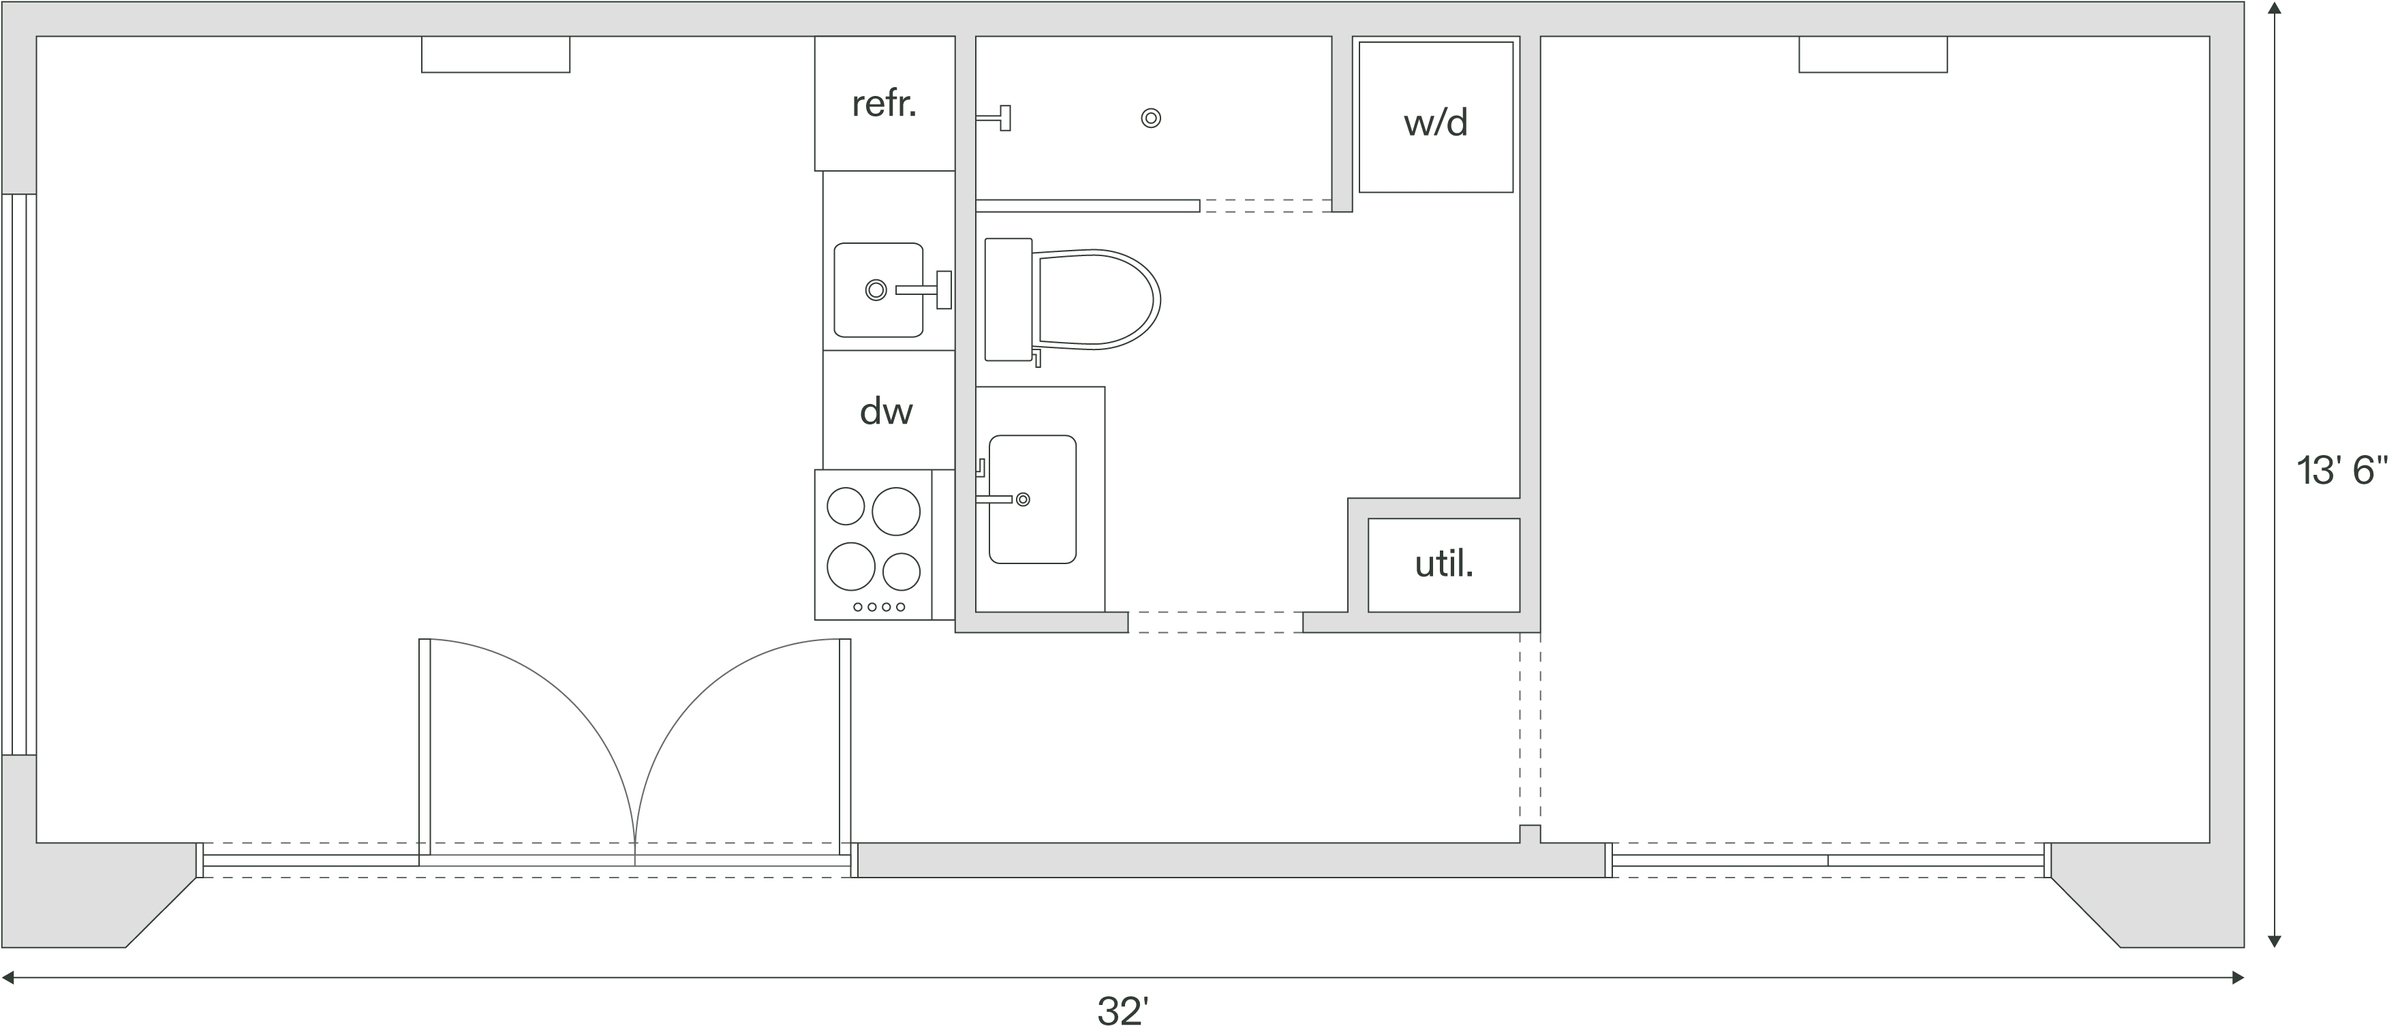 Floor plan of small home showing rooms and dimensions